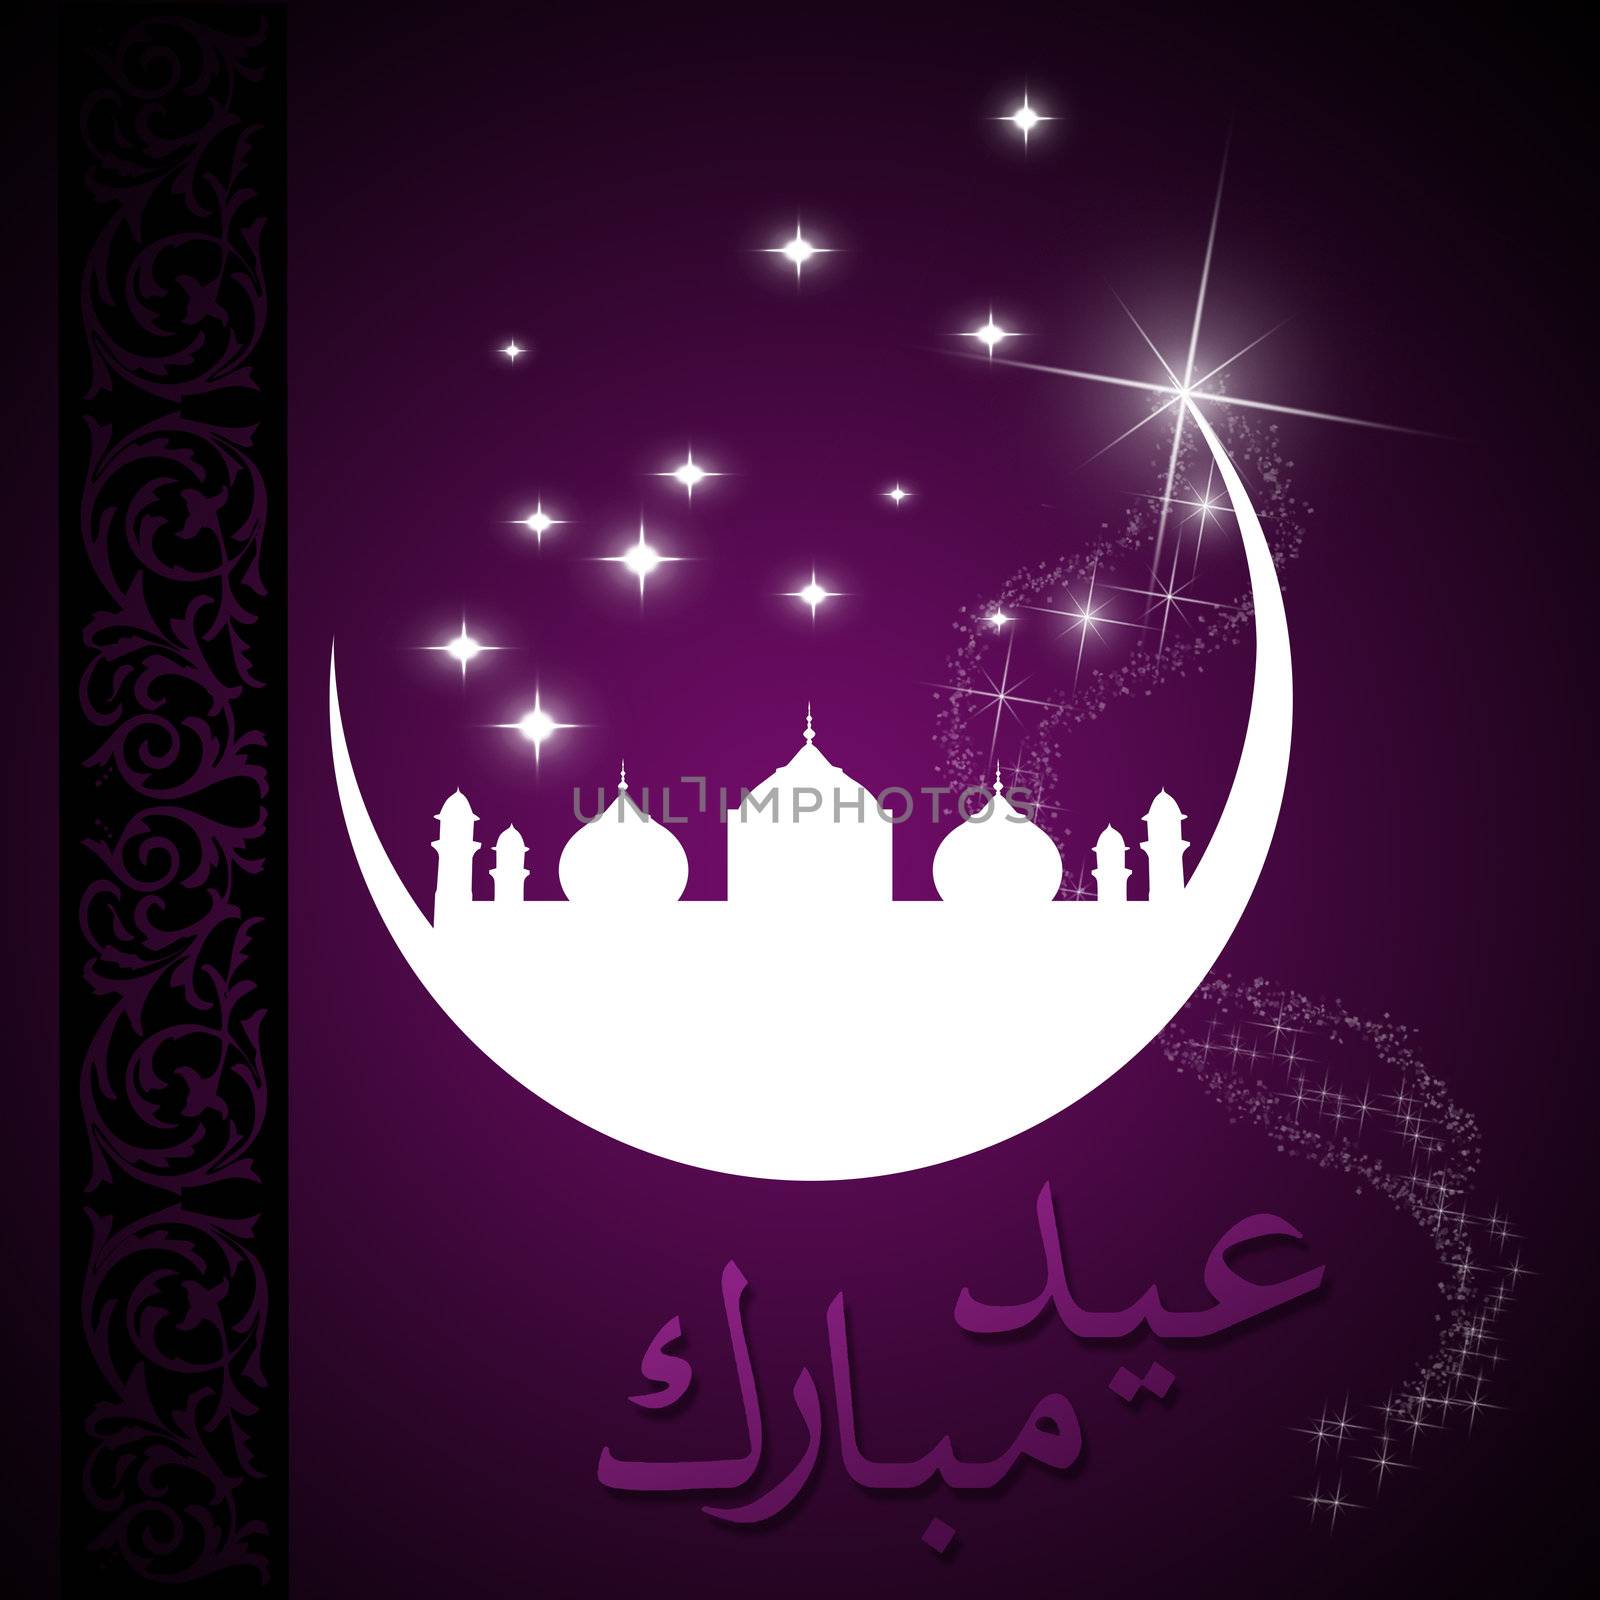 Eid Greeting illustration with silhouettes of the moon, stars and a mosque. Eid Mubarak lettering in arabic script and an ornamental border.